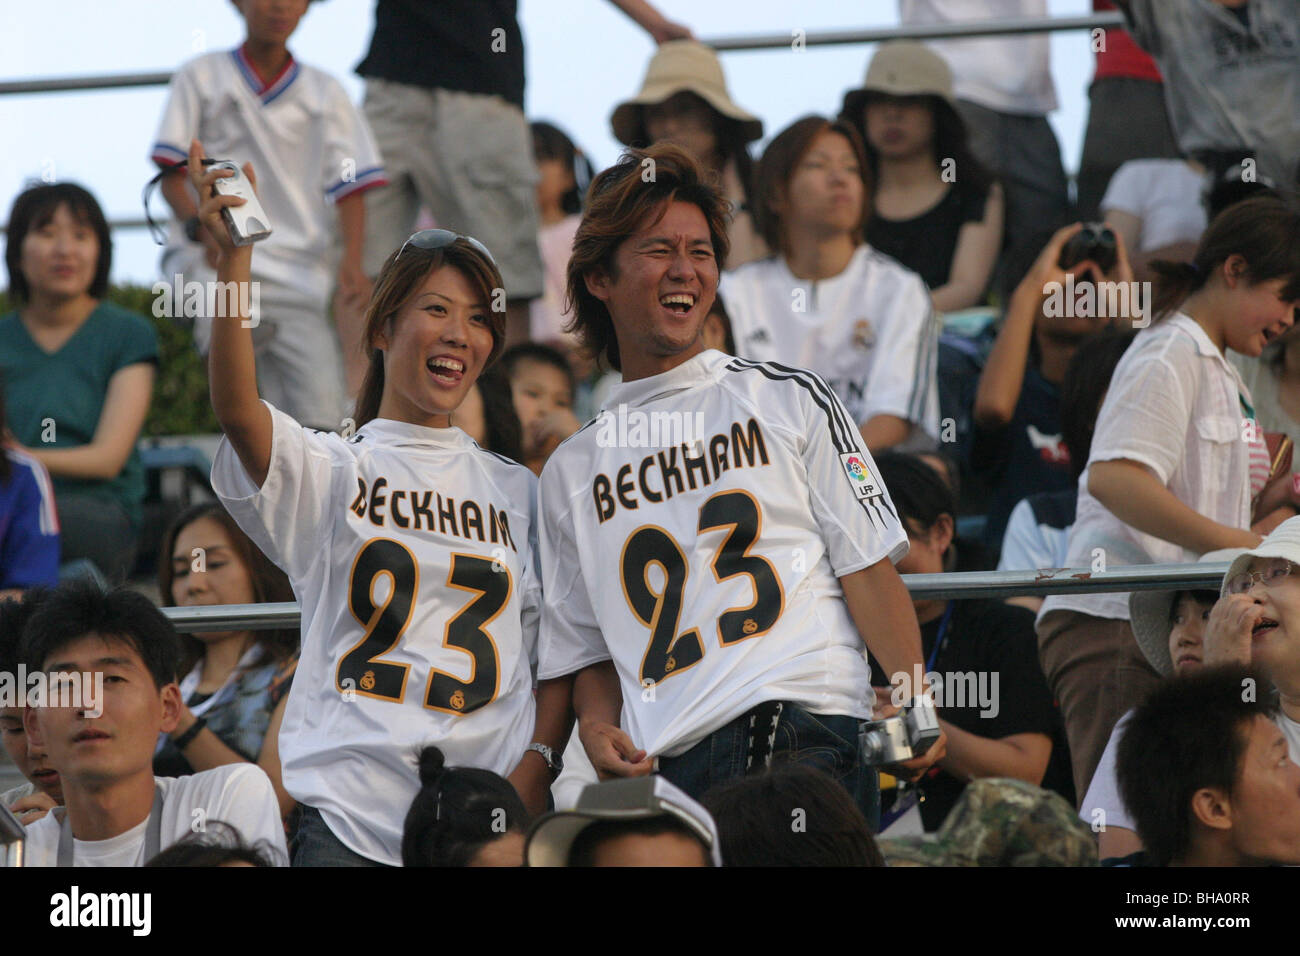 Real Madrid football club fans show their support for David Beckham, in Tokyo, Japan. Stock Photo